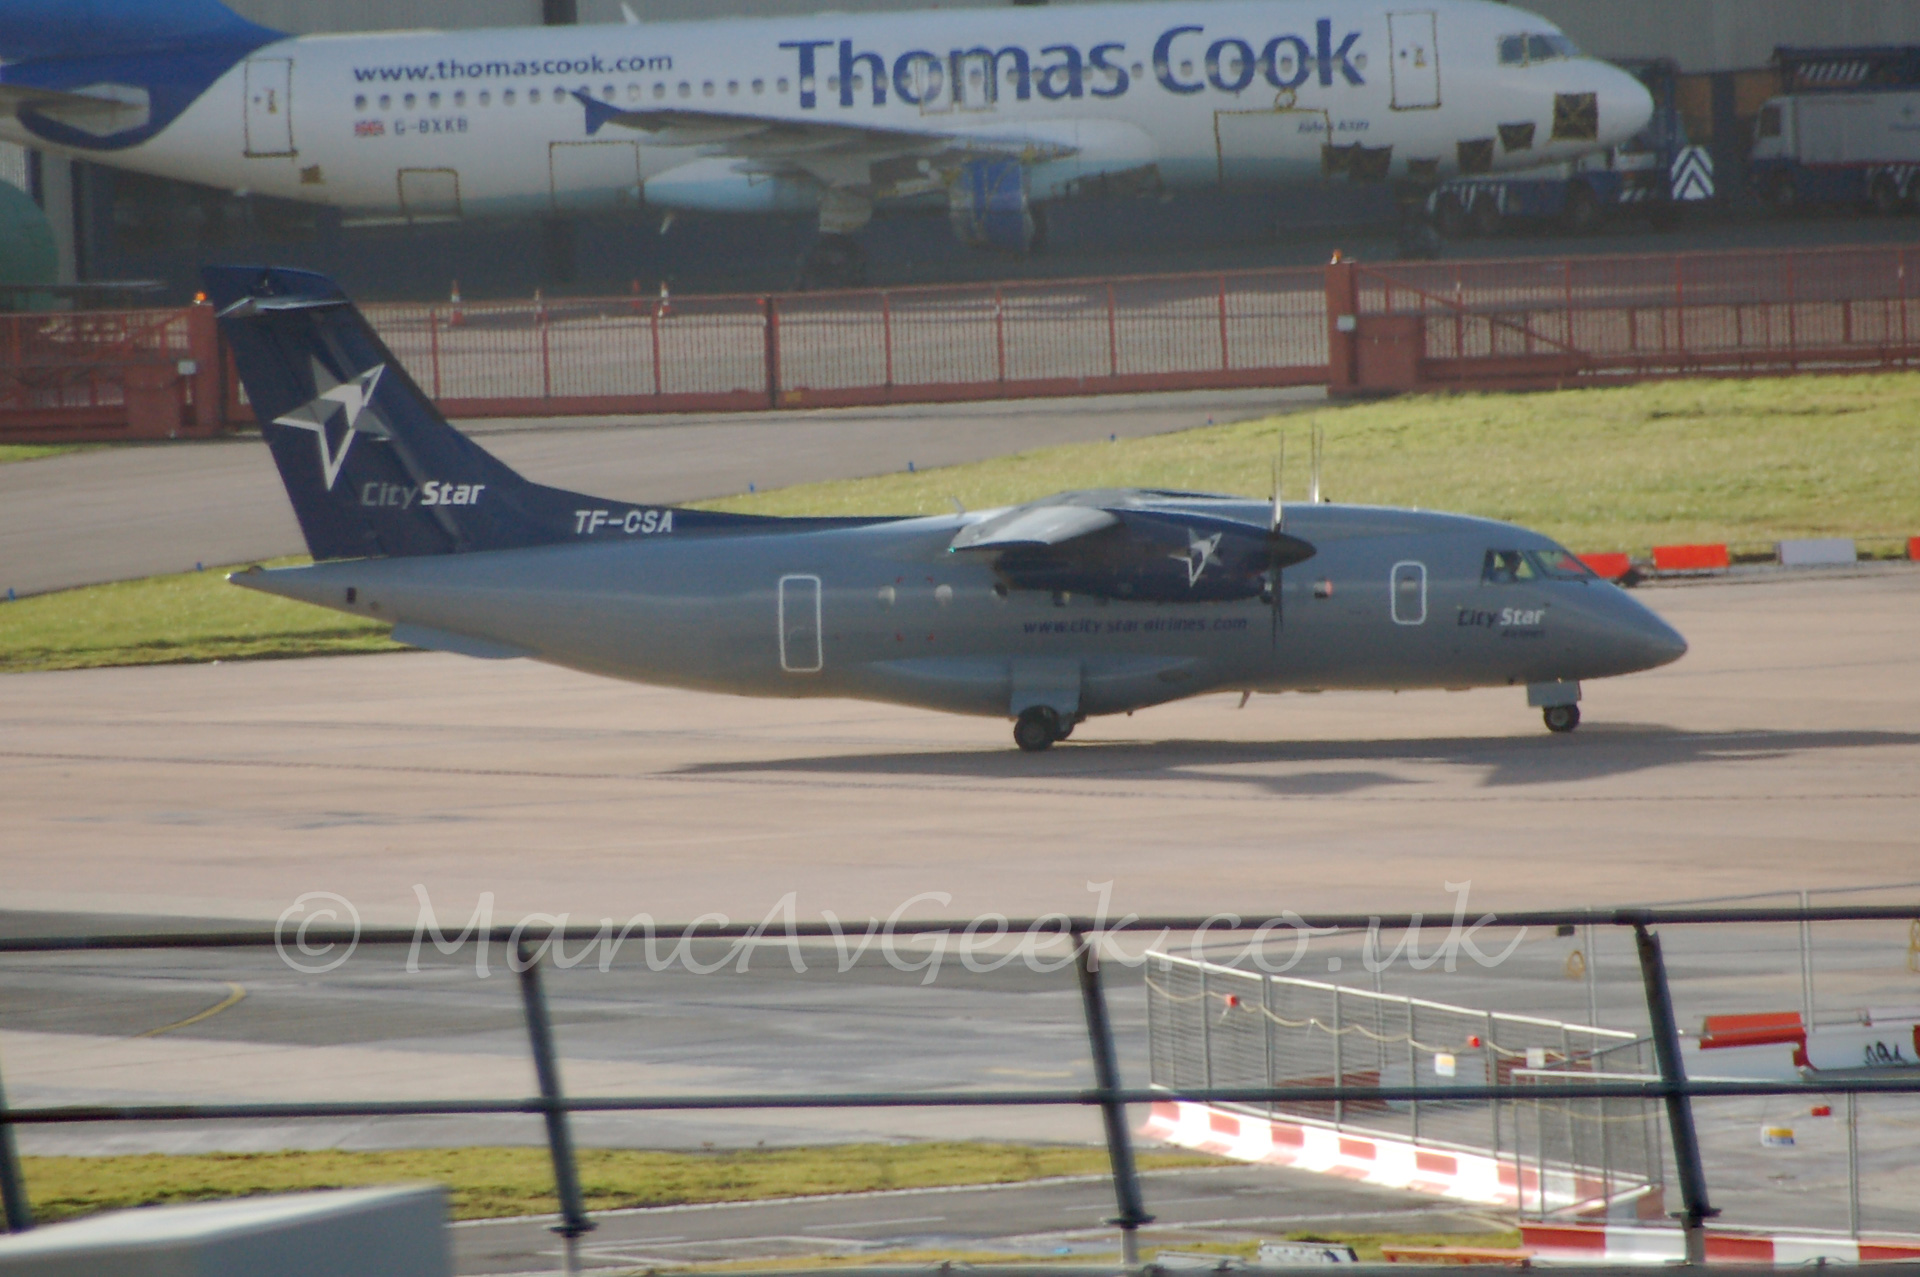 Side view of a dark grey, high-winged, twin propellor-engined airliner with dark blue tail and engine pods, with a white and blue plane behind a red metal fence in the background.